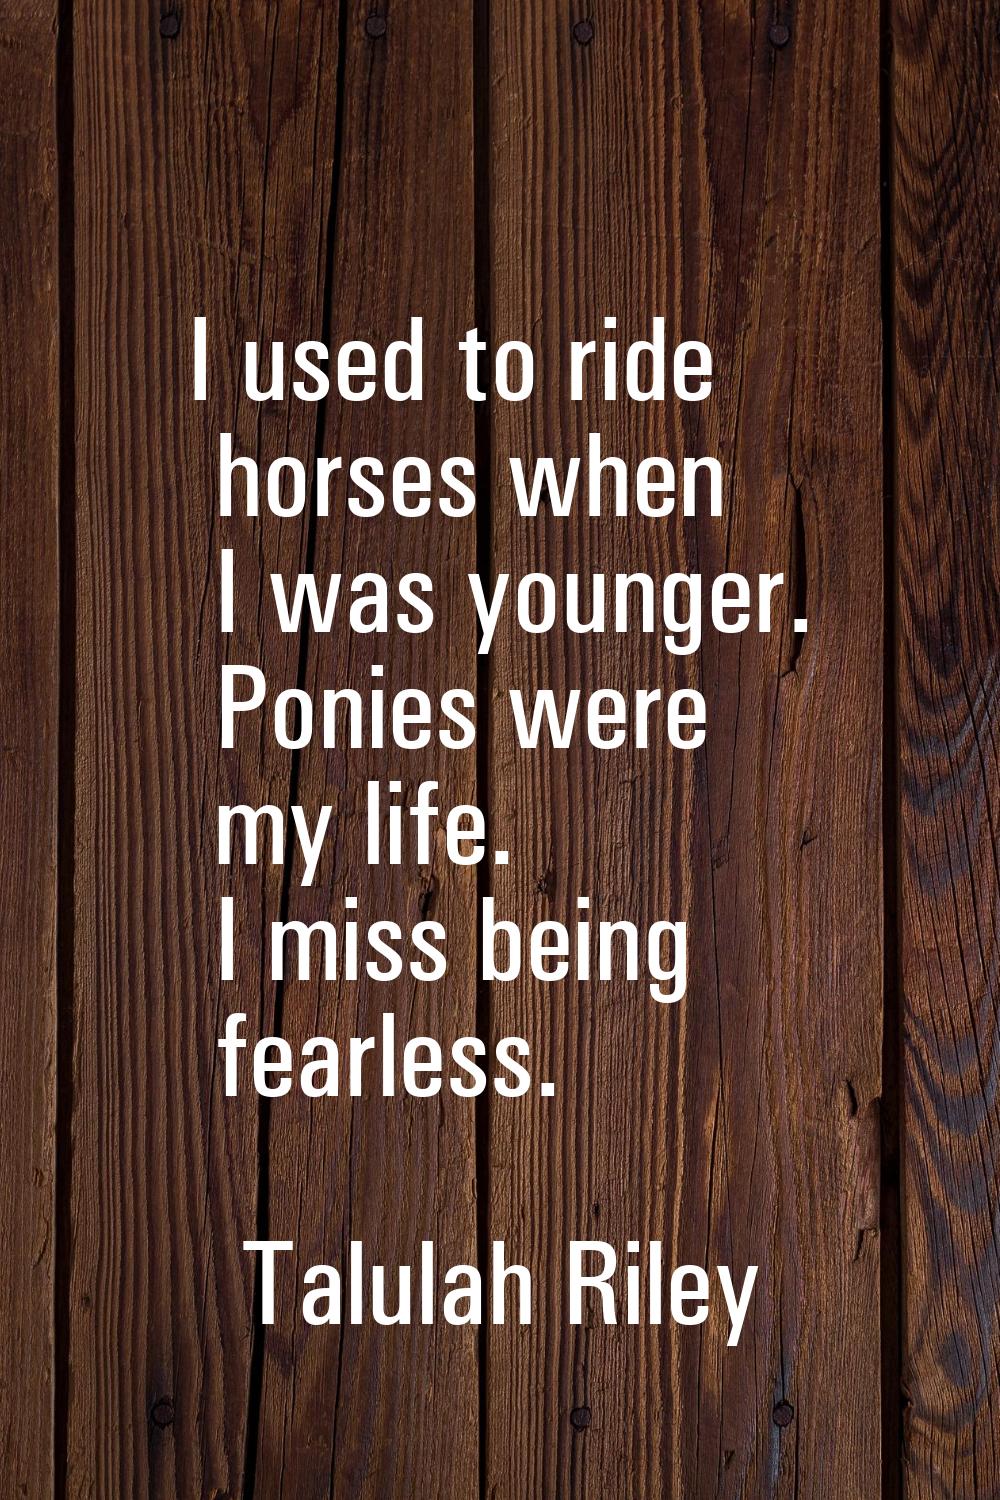 I used to ride horses when I was younger. Ponies were my life. I miss being fearless.